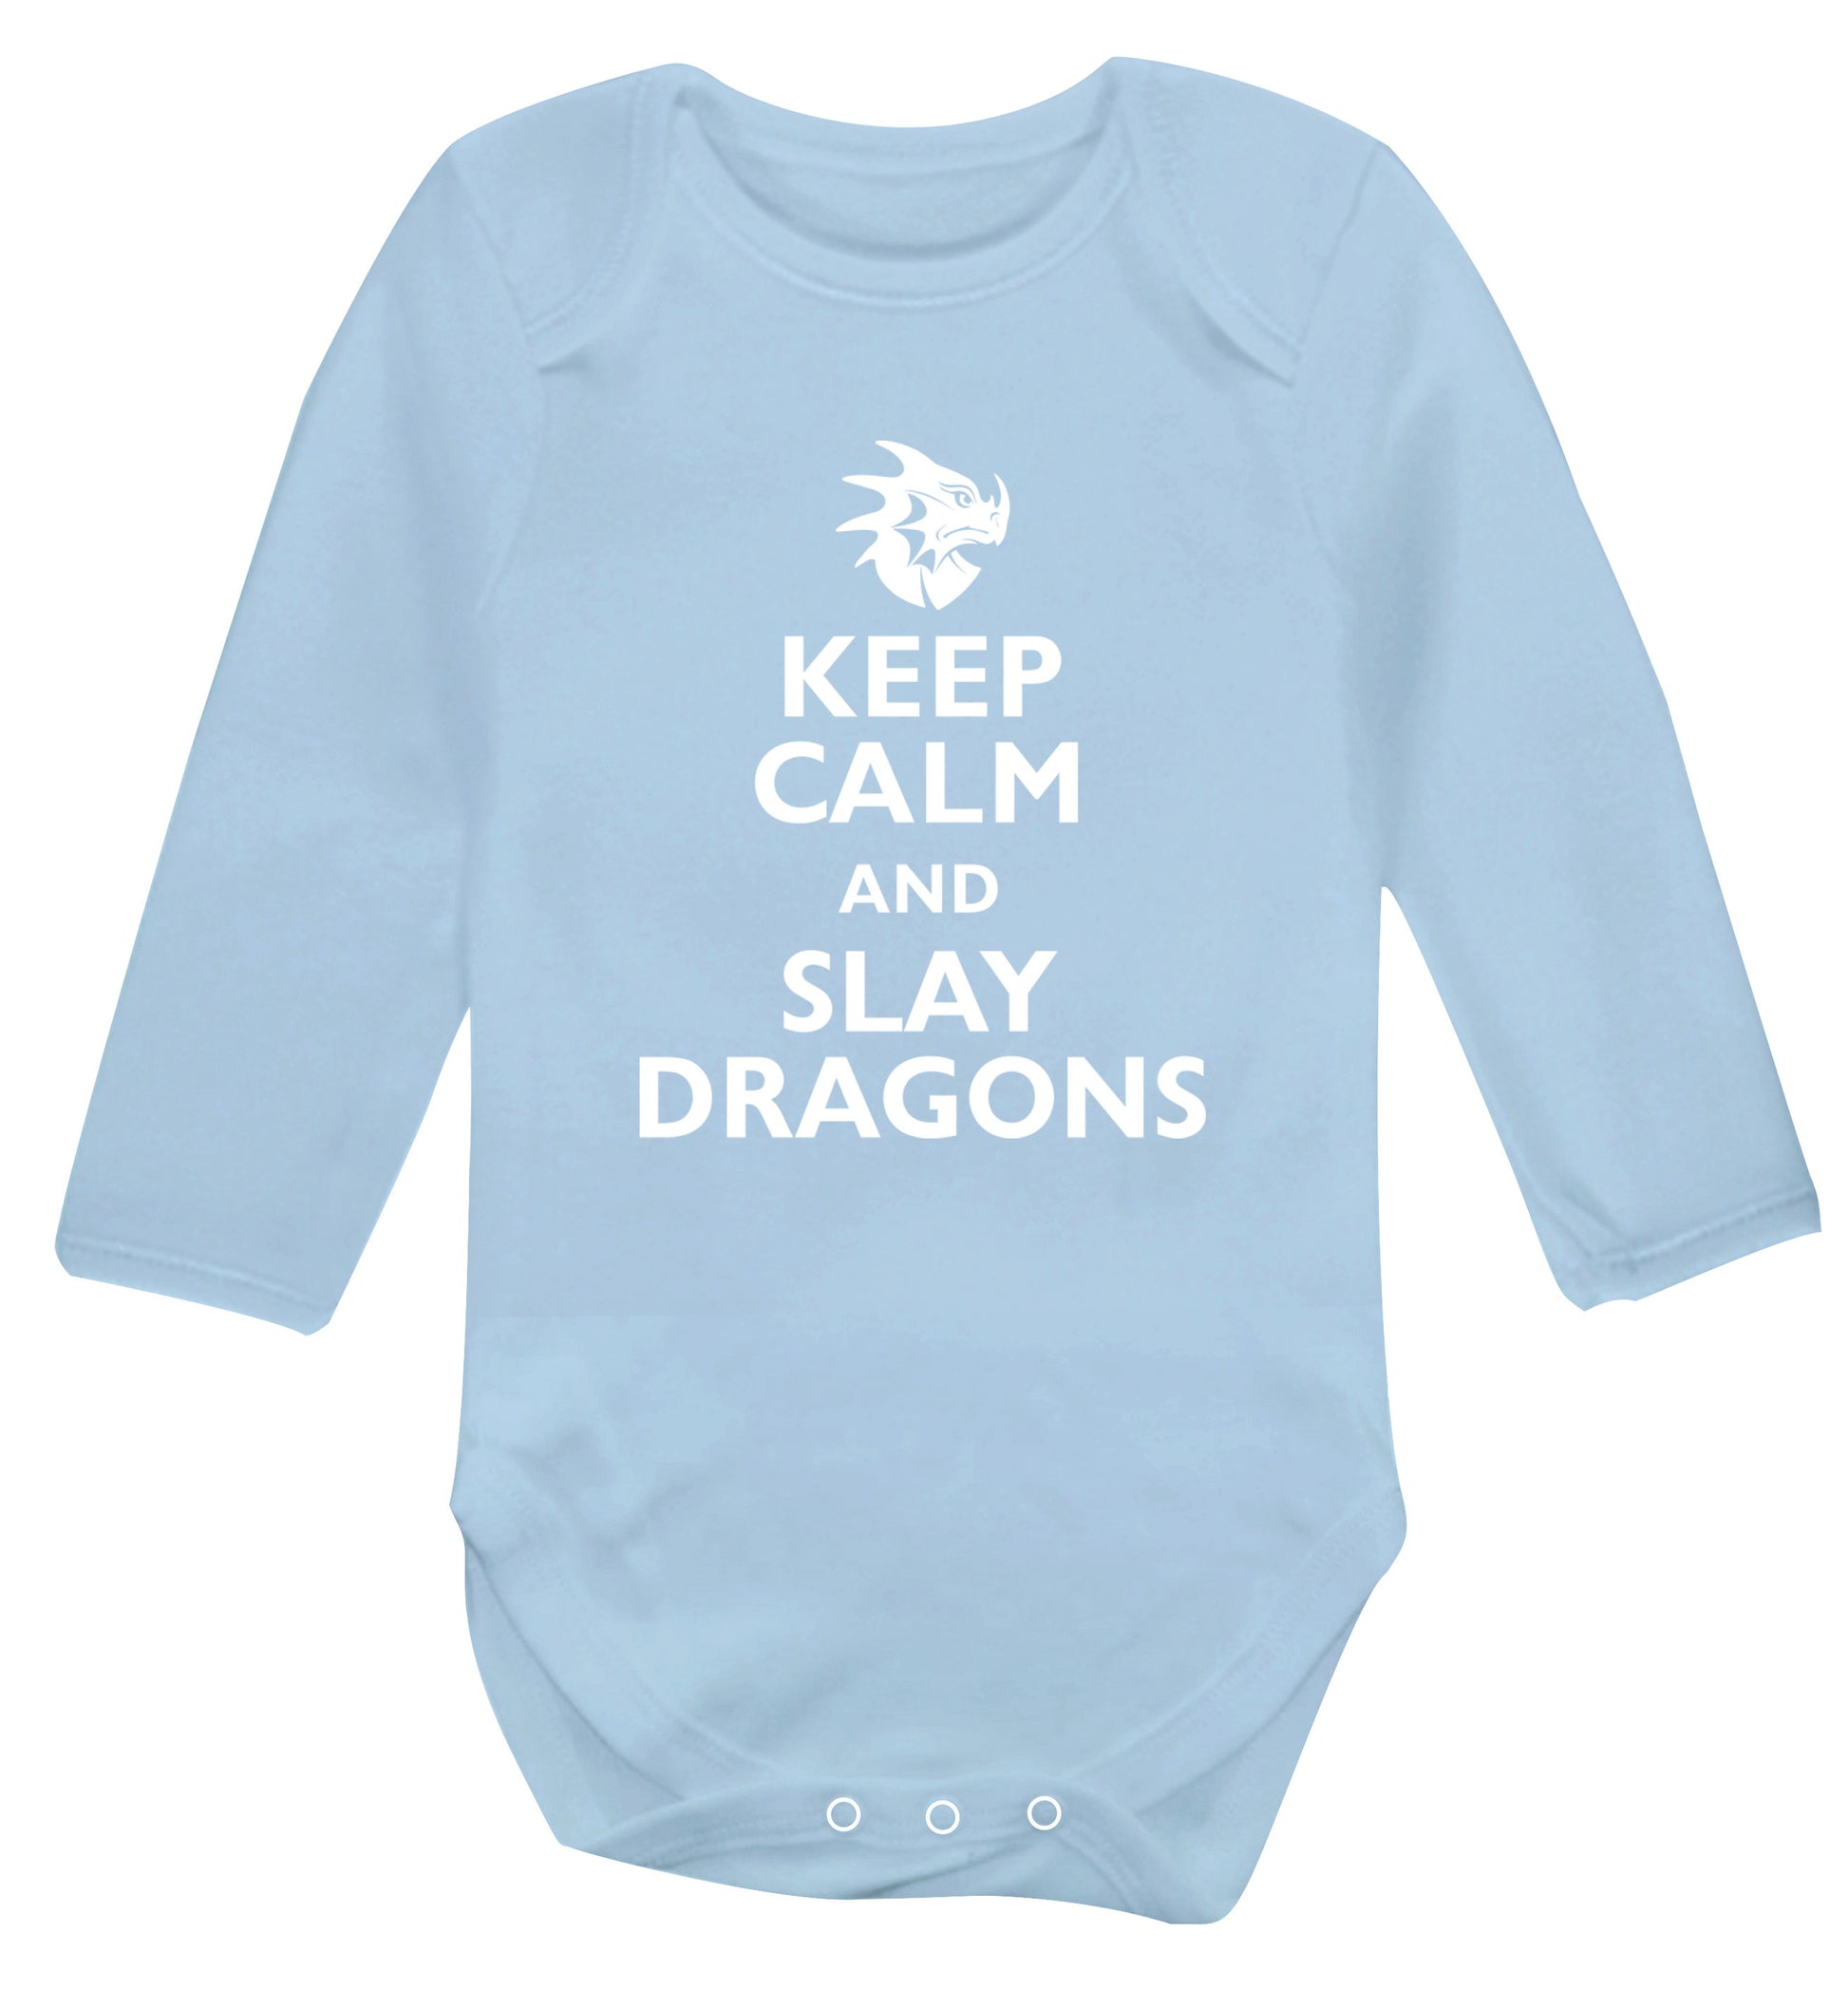 Keep calm and slay dragons Baby Vest long sleeved pale blue 6-12 months